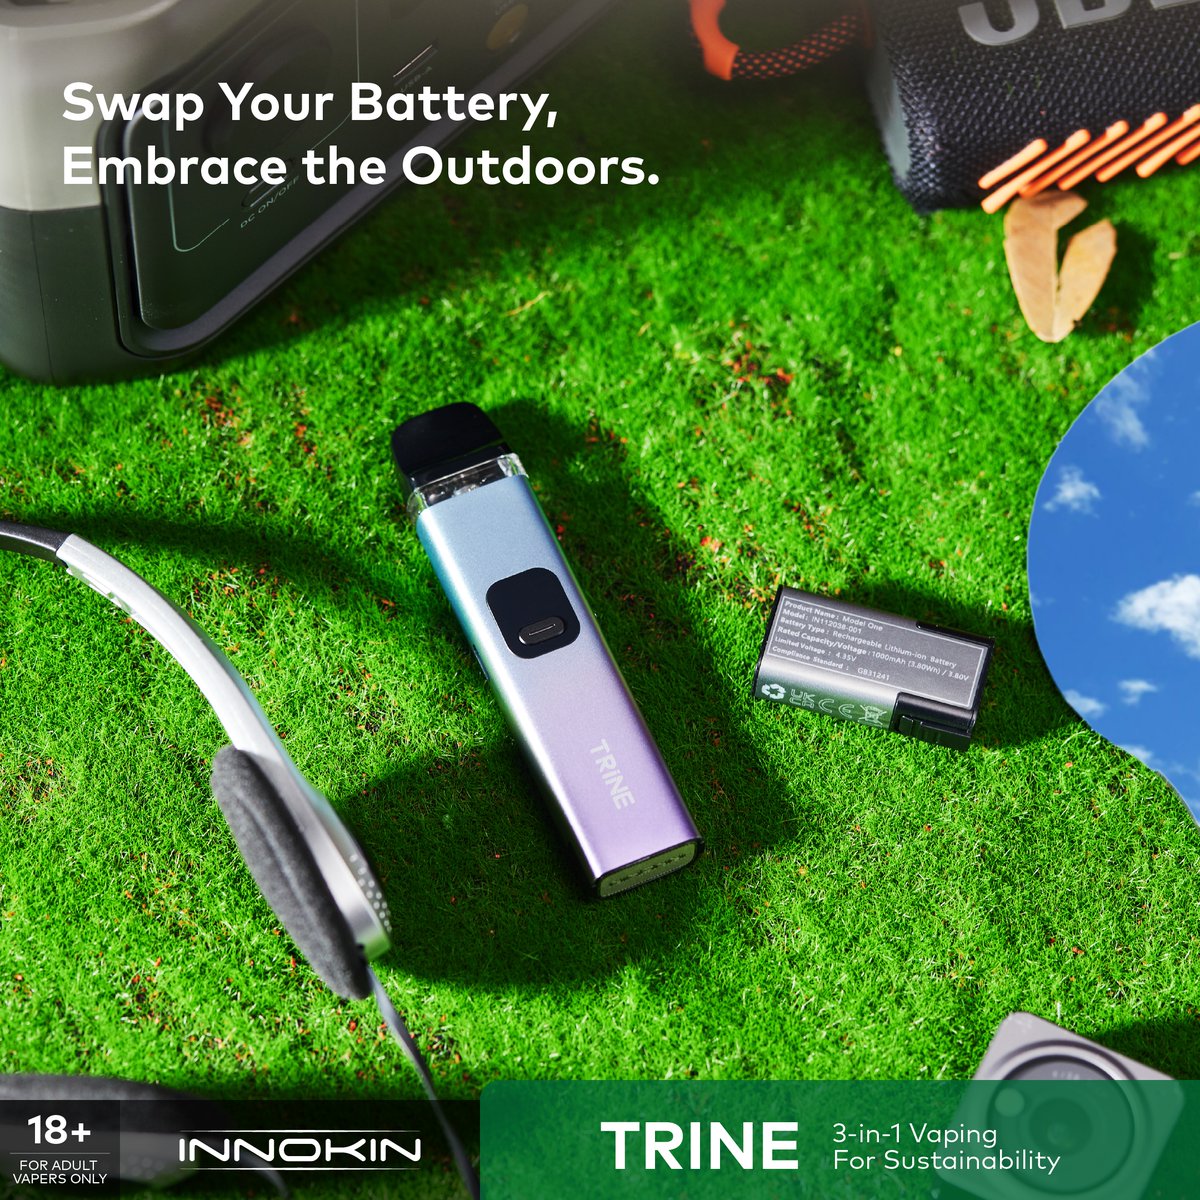 𝐓𝐑𝐈𝐍𝐄 's Backup Battery ensures extended performance for your outdoor adventures! 🌳 What's your go-to activity that needs 𝐓𝐑𝐈𝐍𝐄 ？🏕️🏔️🏞️ ⚡️No need for extra cables, just grab and go! ⚡️ 18/21+ only #Vaping #Vapelife #Innokin #TRINE #InnokinTrine #3in1vaping